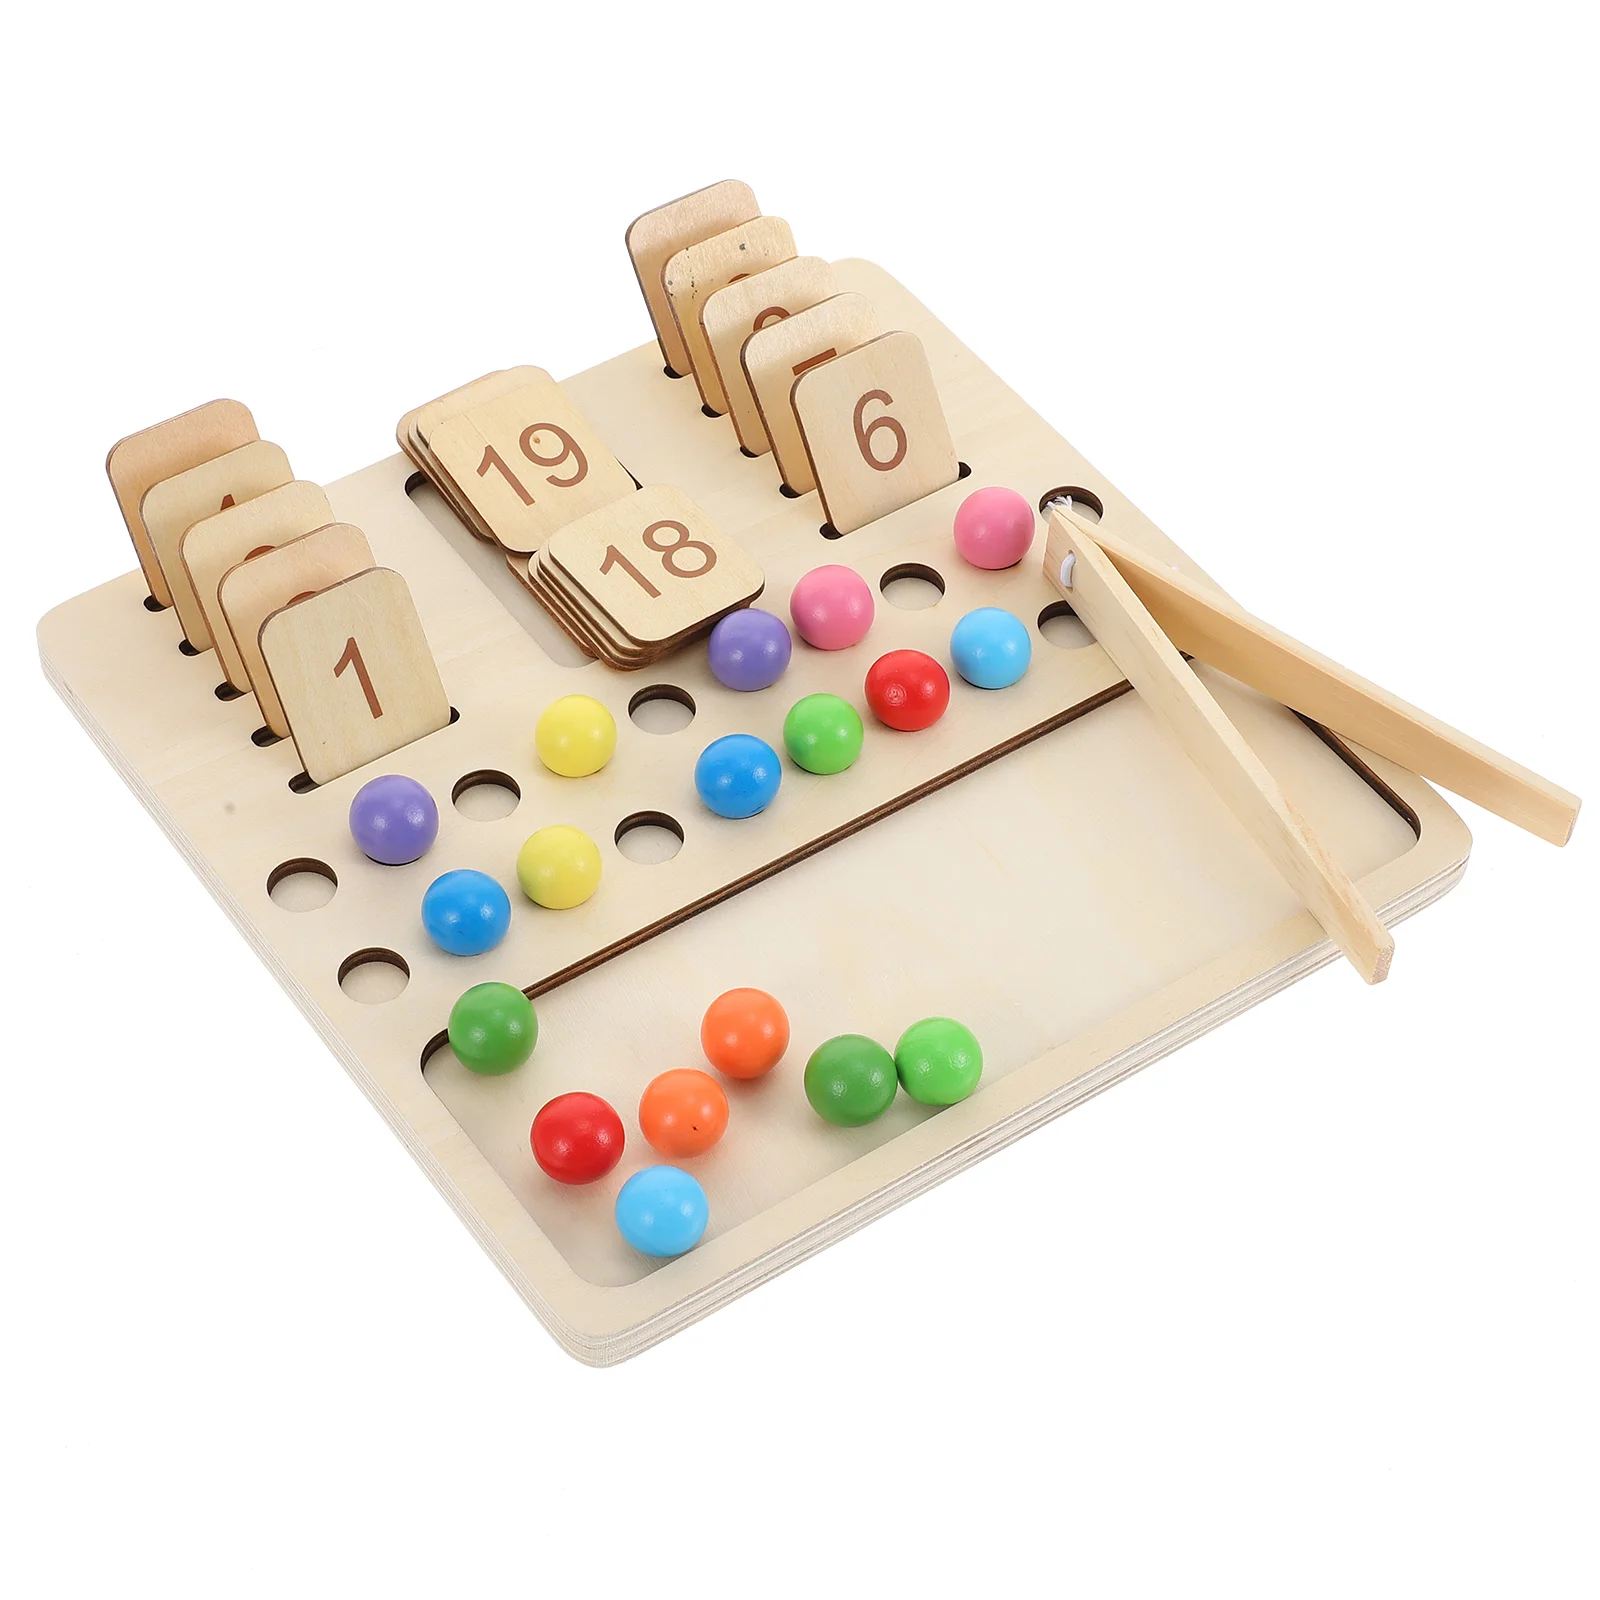 Digital Cognitive Board Toys Wooden Educational Teaching Supplies Playthings Aids Arithmetic Boards Math Learning 1 set of interesting children learning toys baby wooden toys teaching aids playthings